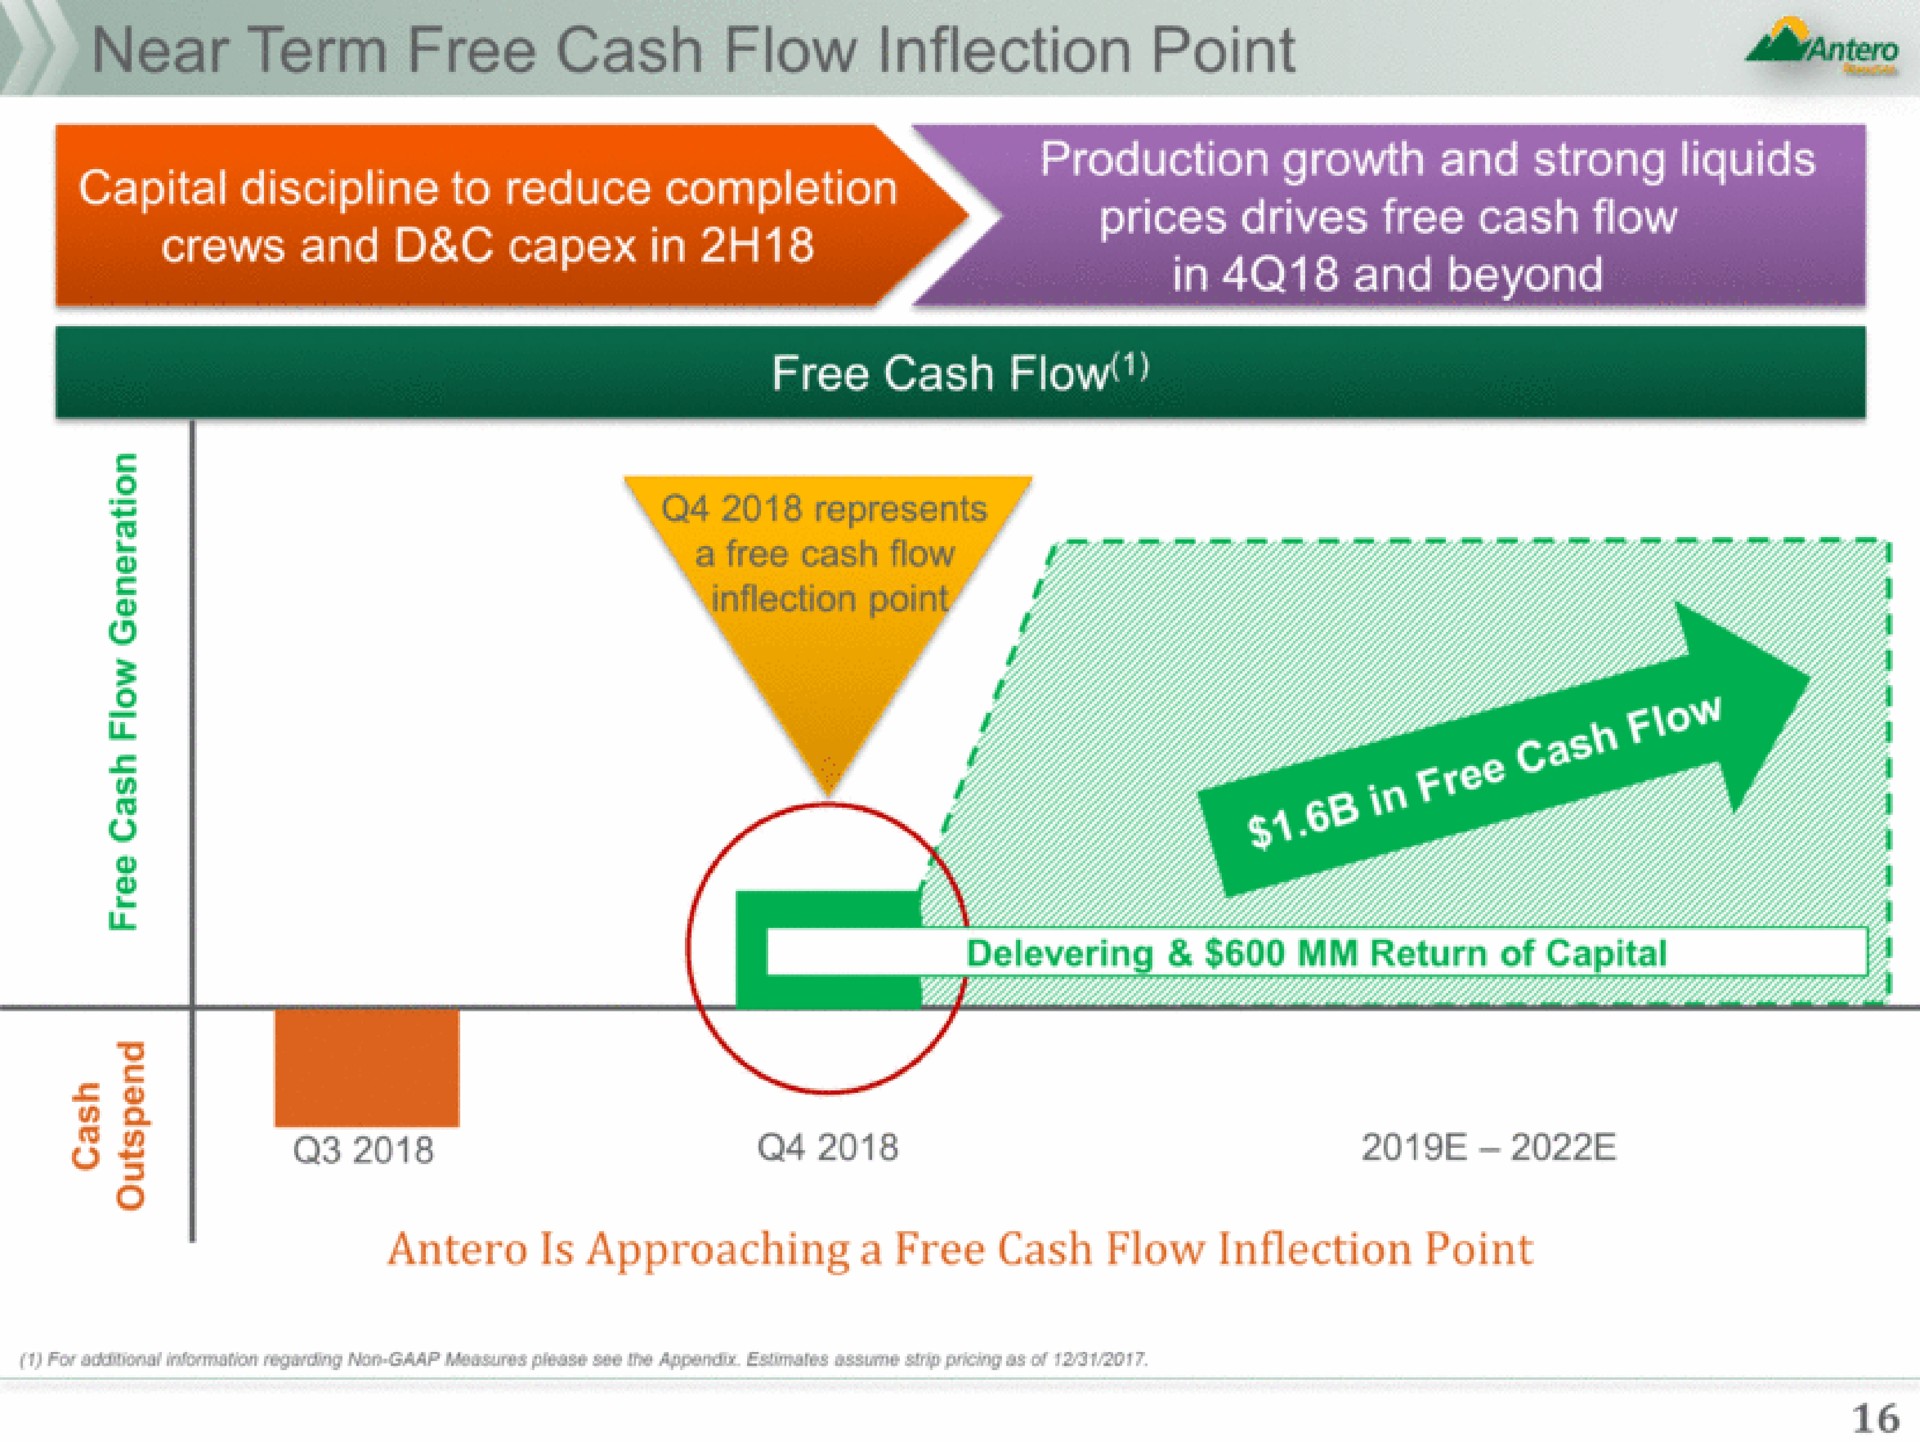 term free cash flow inflection point prices drives free cash flow in and beyond | Antero Midstream Partners